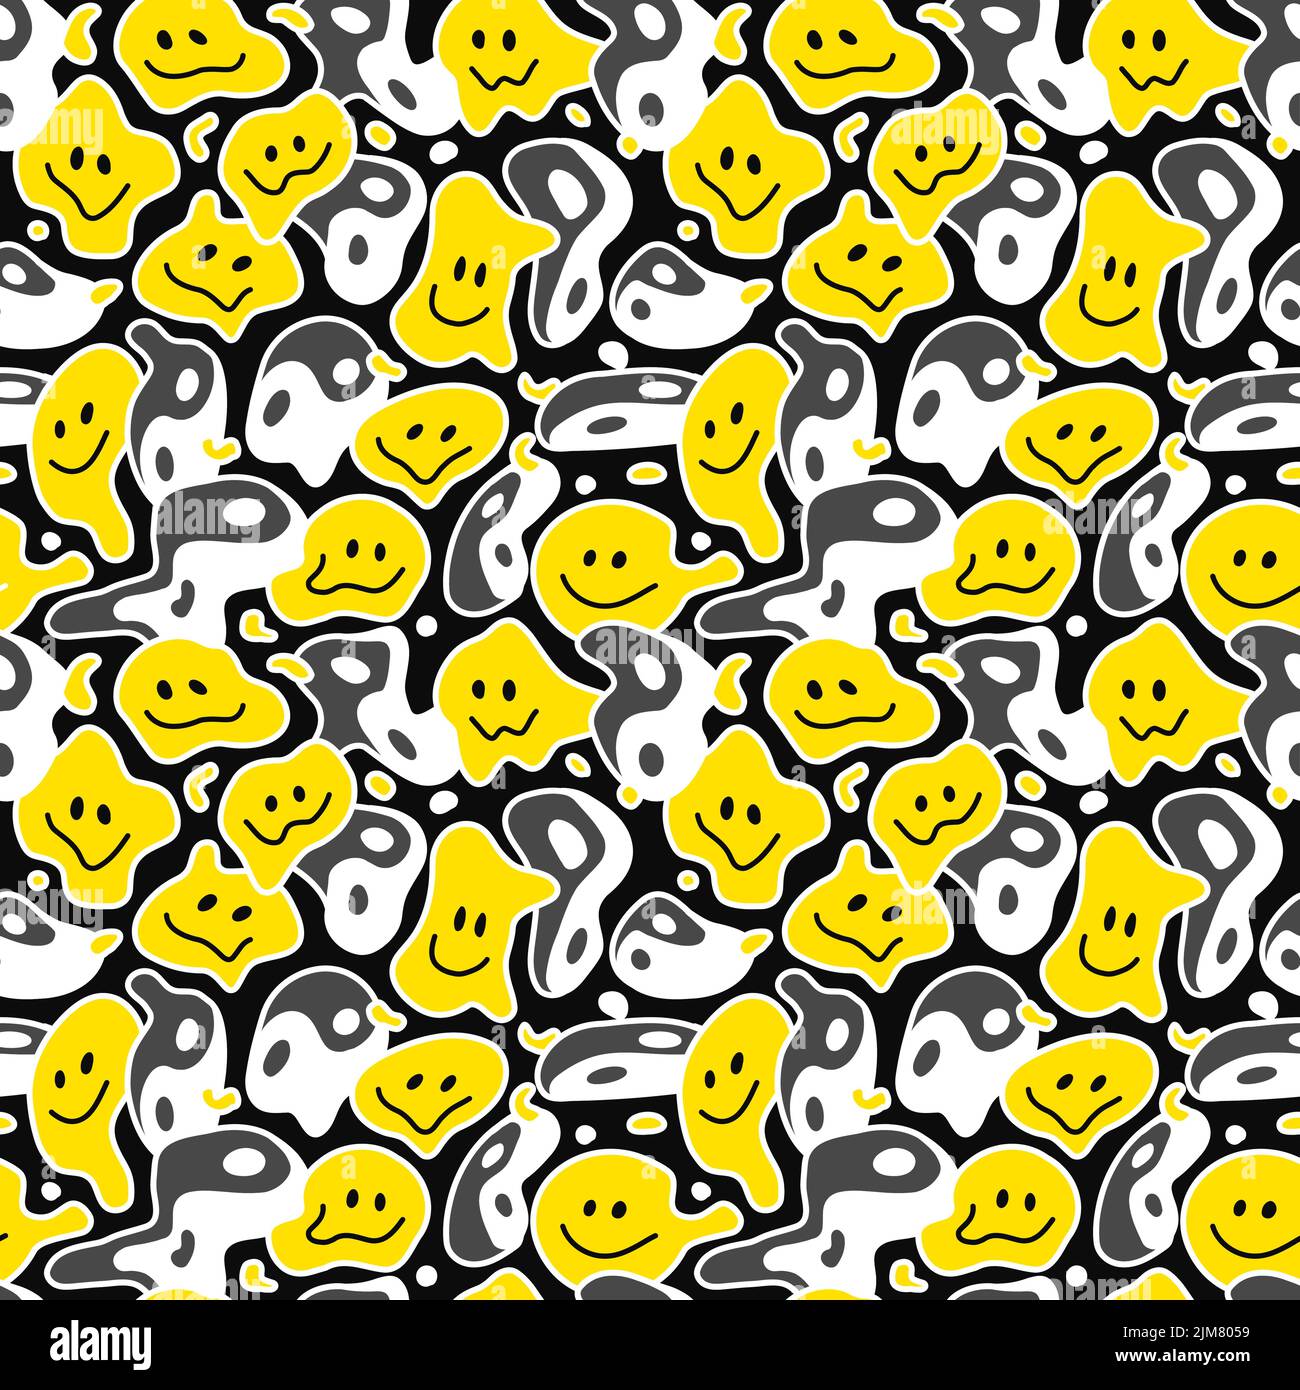 Psychedelic deformed wavy smile face and Yin Yang seamless pattern. Vector hand drawn line doodle cartoon illustration wallpaper. Trippy lsd print,Yin Yang,smile face seamless pattern concept Stock Vector